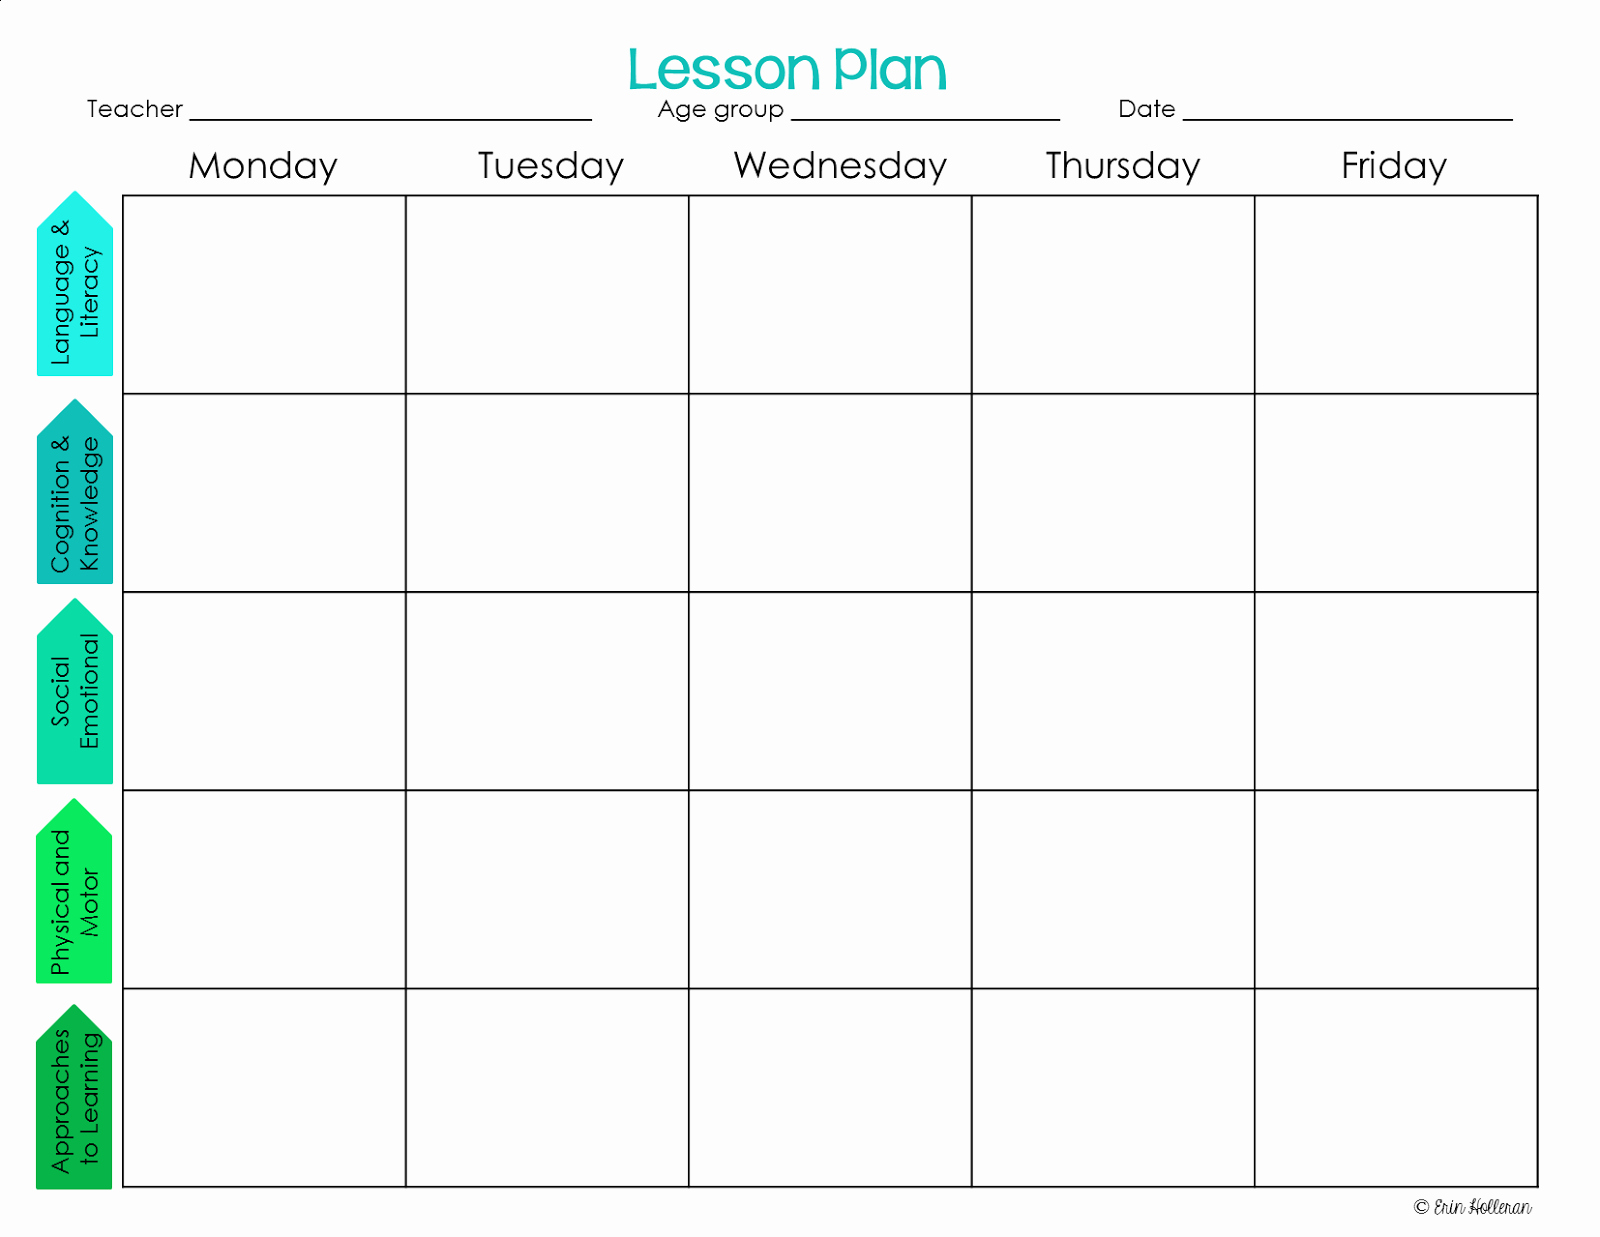 Preschool Lesson Plan Template Luxury Preschool Ponderings Make Your Lesson Plans Work for You